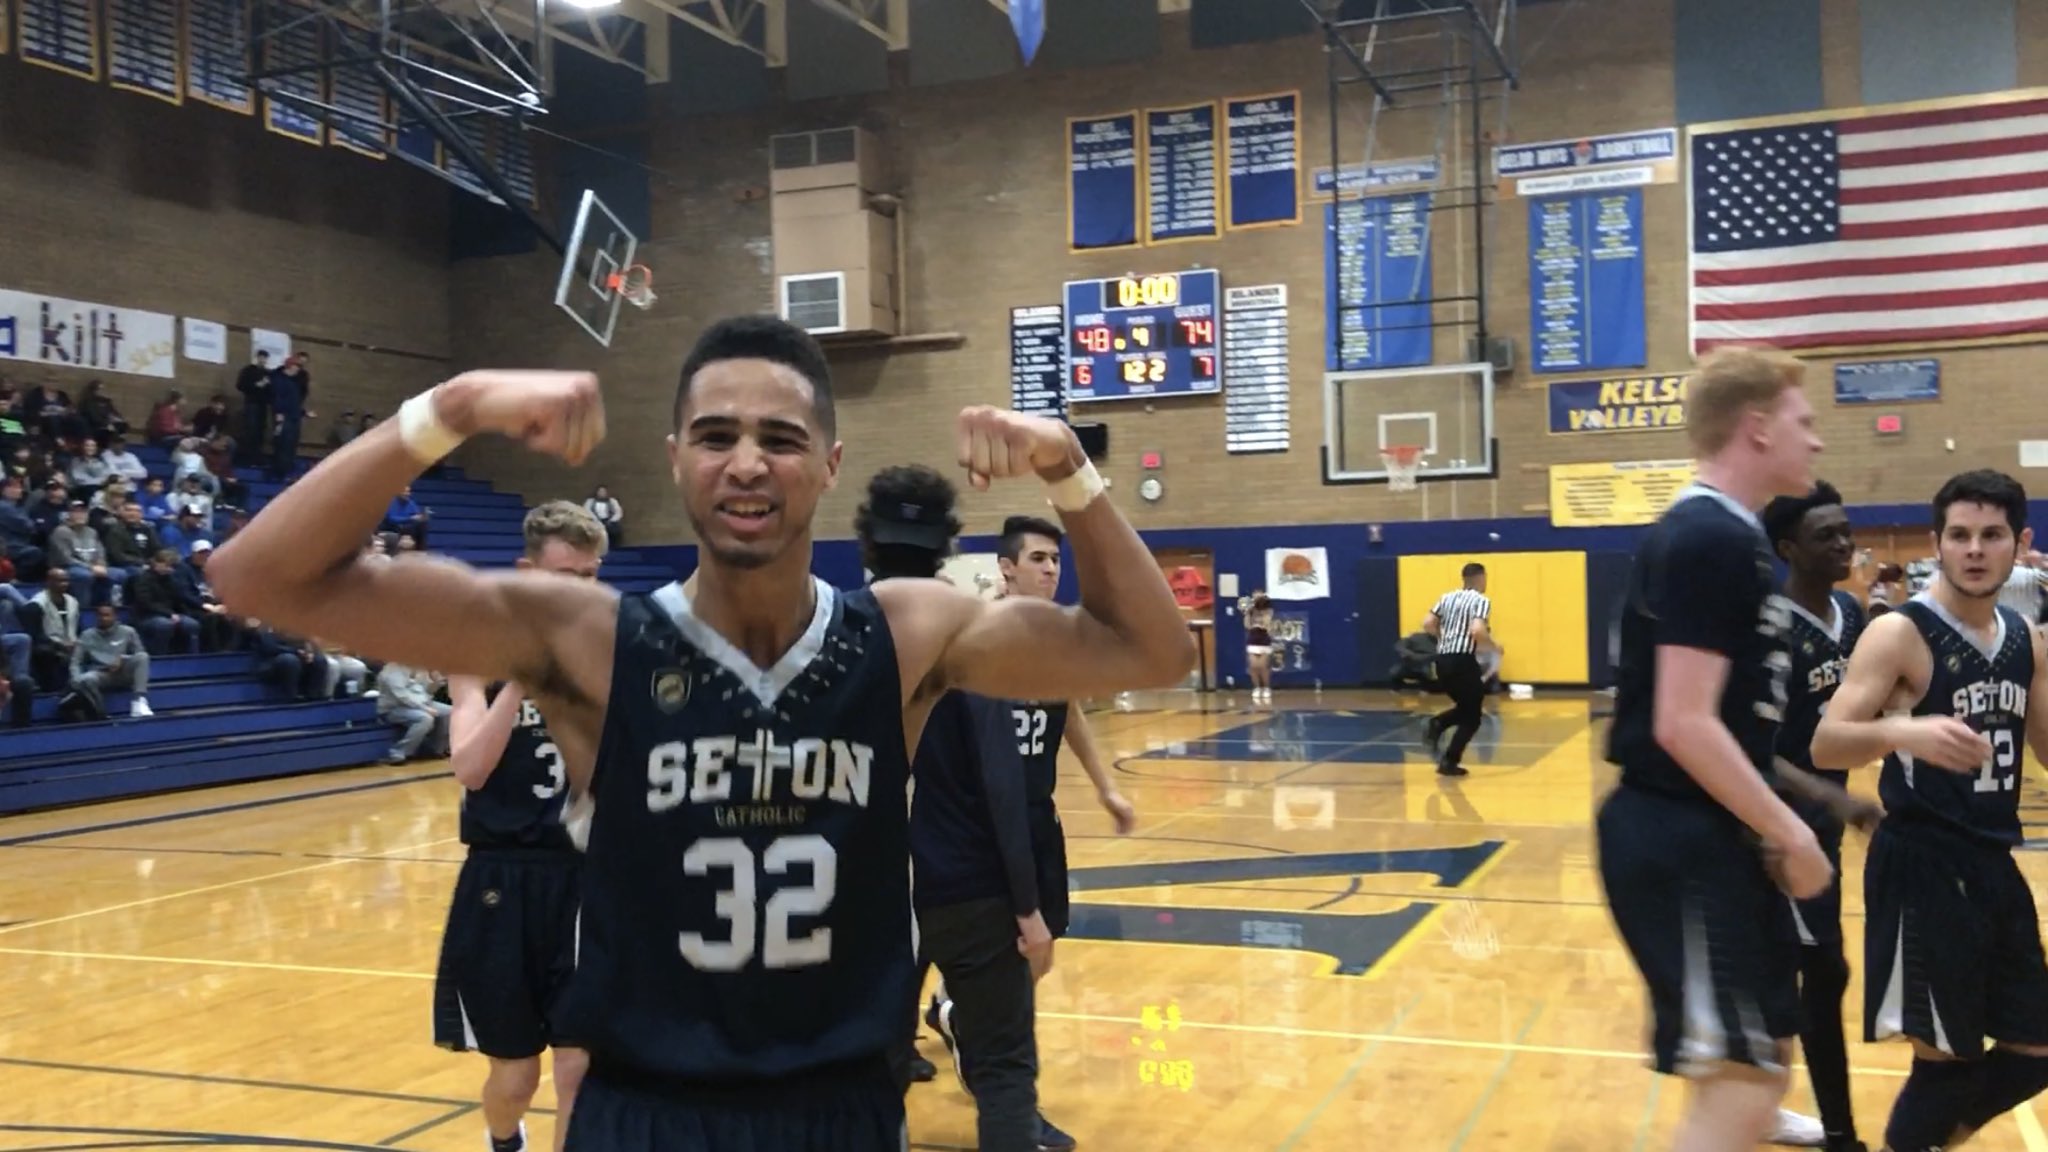 Seton Catholic's Xavian Rushing flexes in the moments after winning a 1A state tournament berth in a rout of Montesano on Saturday.